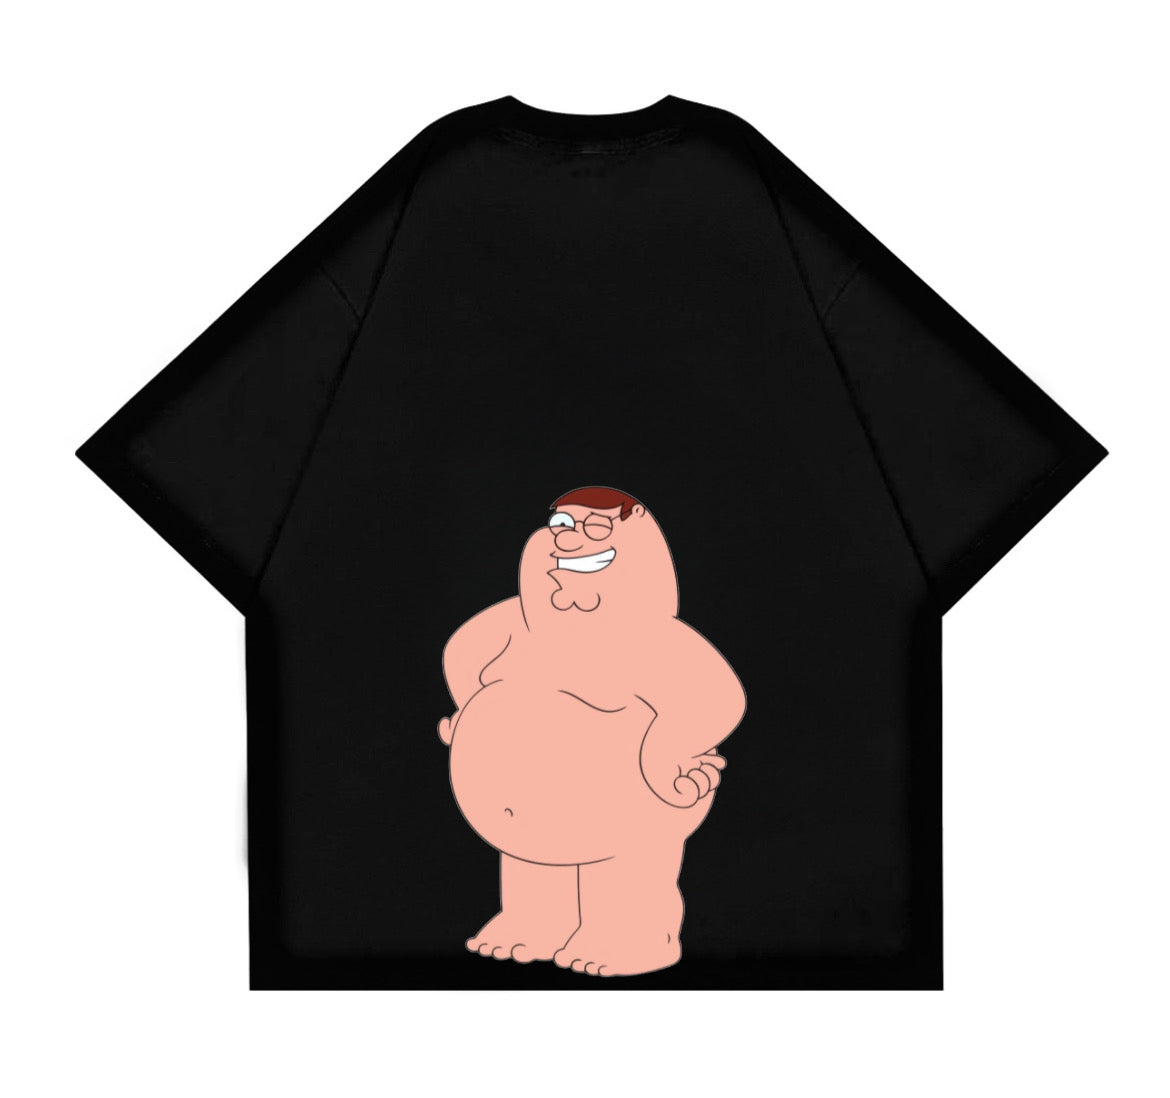 PETER GRIFFIN OVERSIZED T-SHIRT